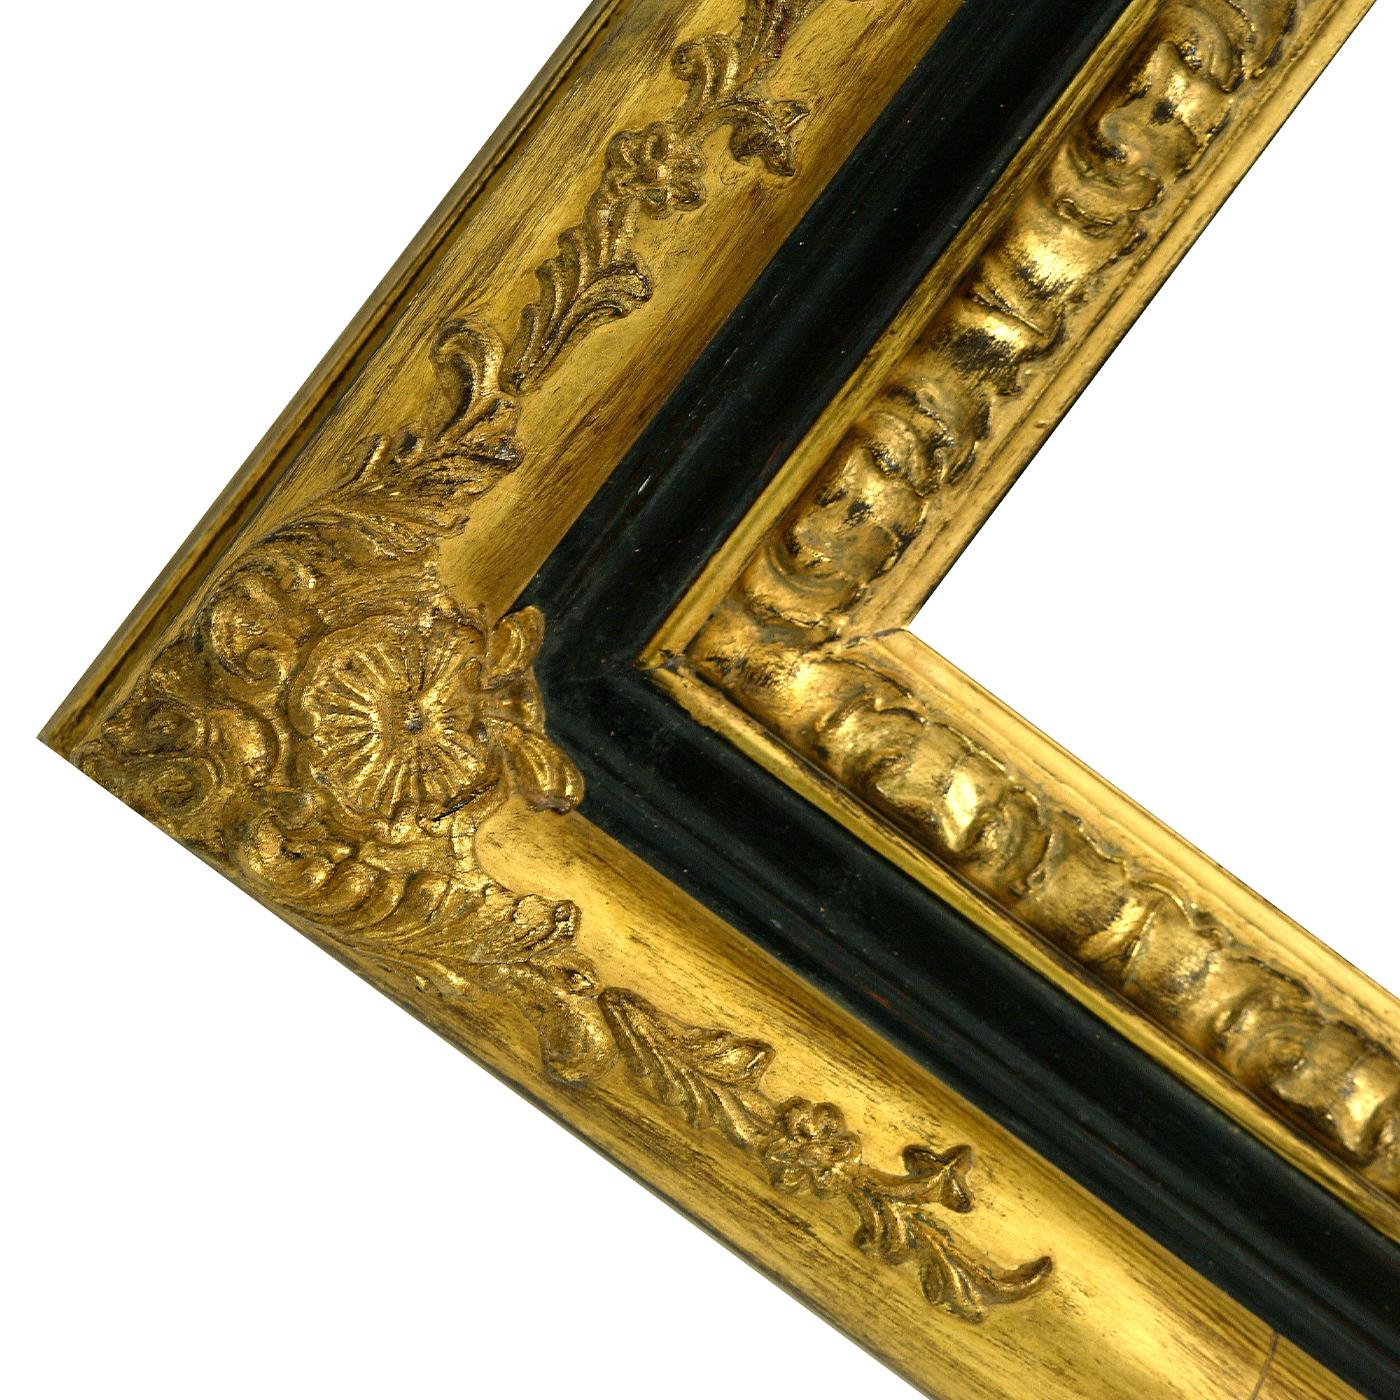 Exuding a sophisticated, dramatic flair, this wall mirror is a deft showcase of craftsmanship and of refined materials. Handmade of wood lacquered in a spectacular ebony shade, its richly detailed yet simple, rectangular frame is decorated with